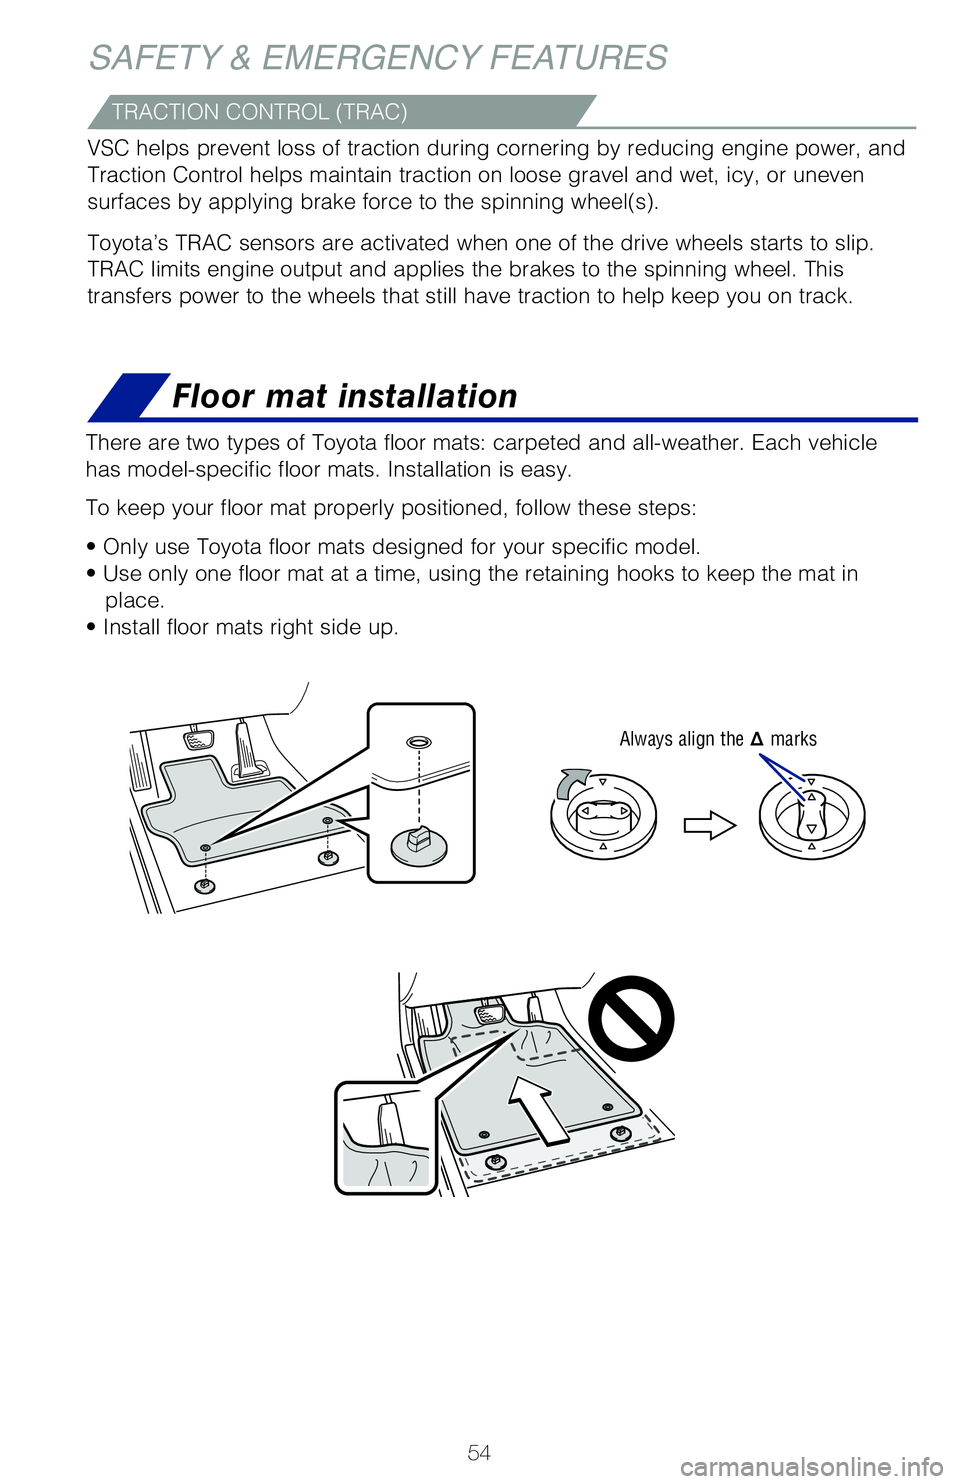 TOYOTA RAV4 HYBRID 2020  Owners Manual (in English) 54
Floor mat installation
SAFETY & EMERGENCY FEATURES
There are two types of Toyota floor mats: carpeted and all-weather. Each\
 vehicle 
has model-specific floor mats. Installation is easy. 
To keep 